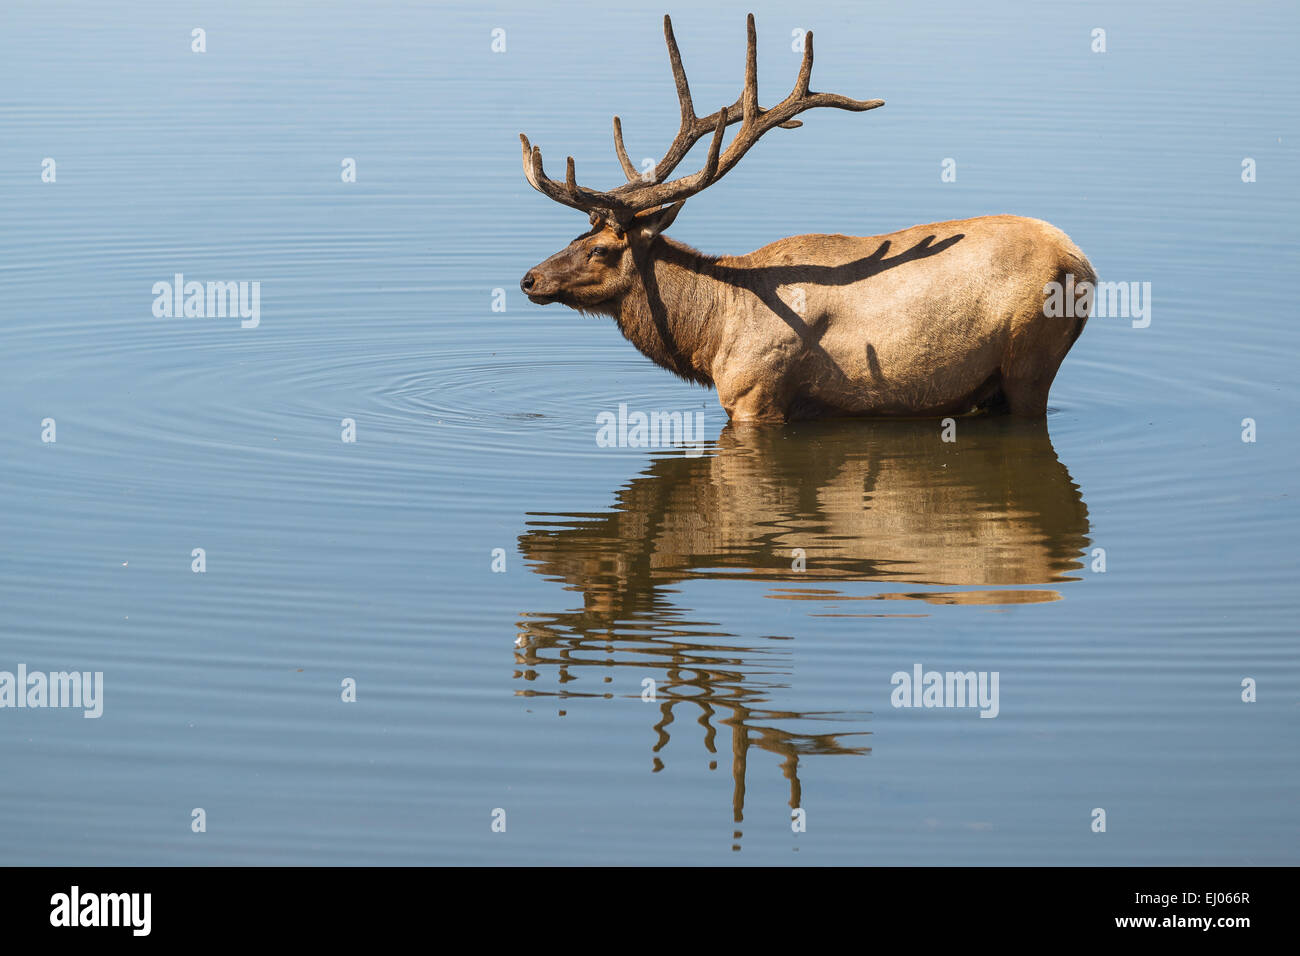 A bull elk having a bath in Lake Yellowstone, Yellowstone National Park, Wyoming, United States of America. Stock Photo